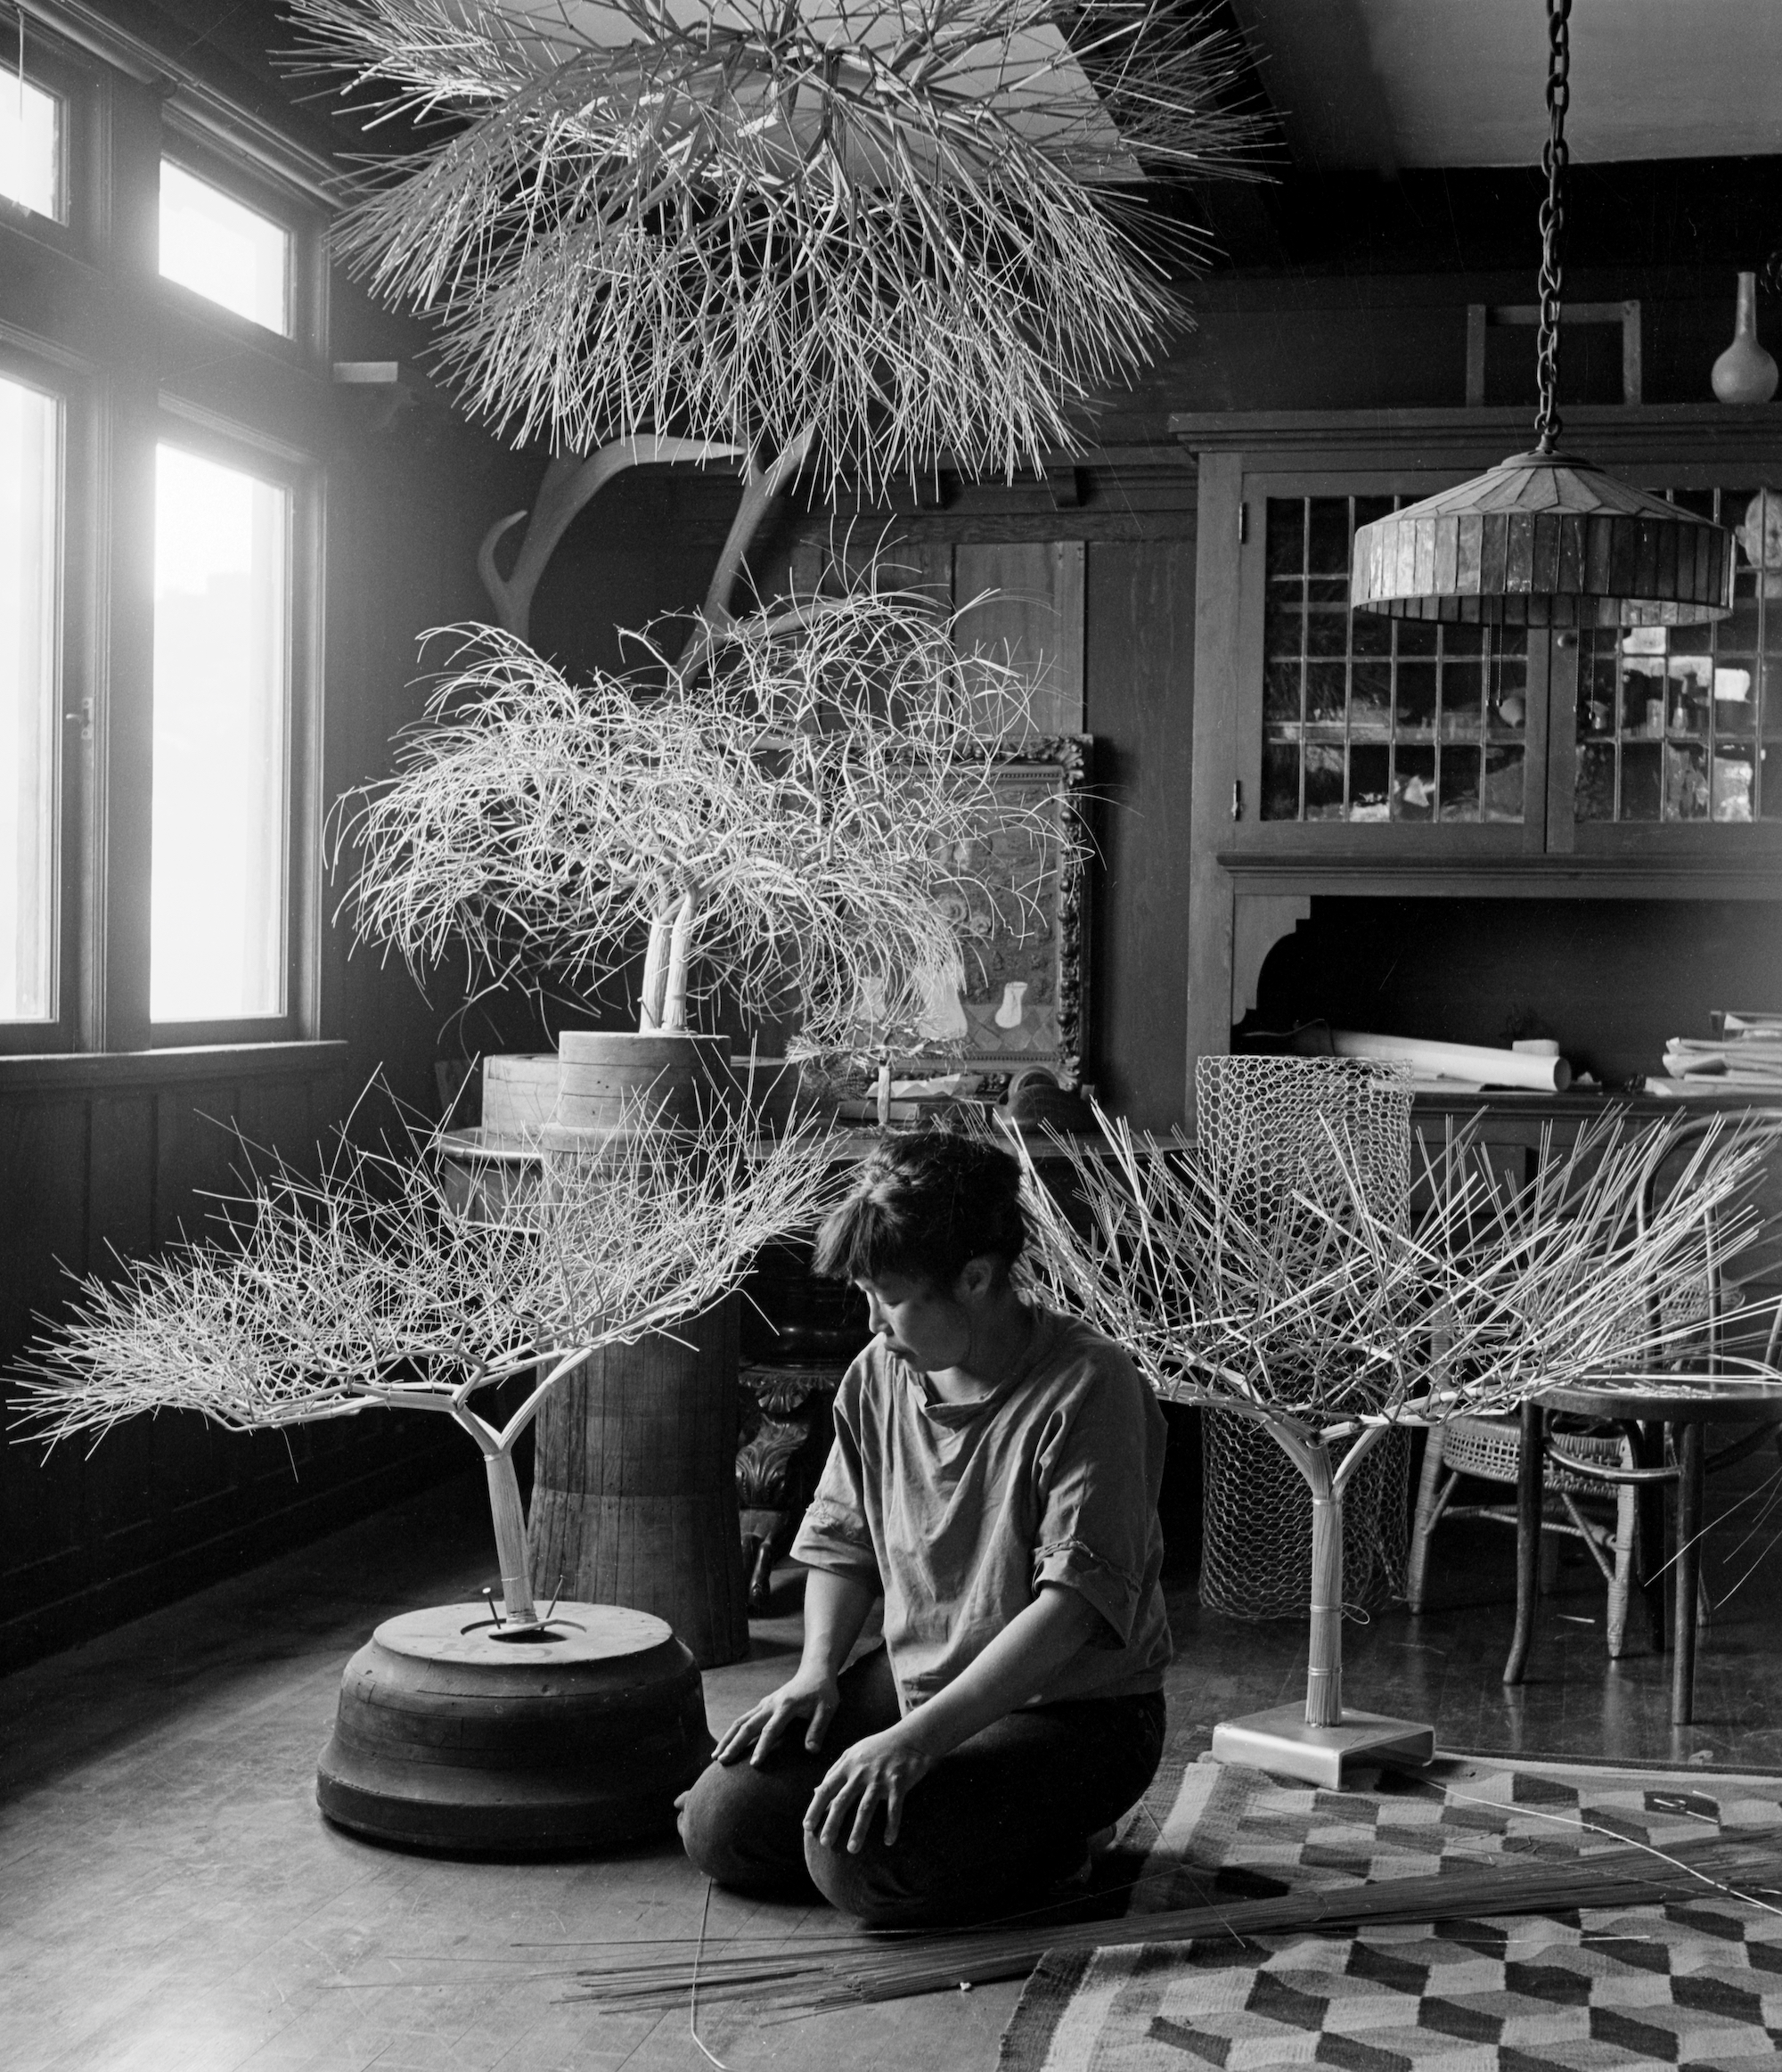 Imogen Cunningham, Ruth in Her Dinning Room with Tied-Wire Sculptures, 1963